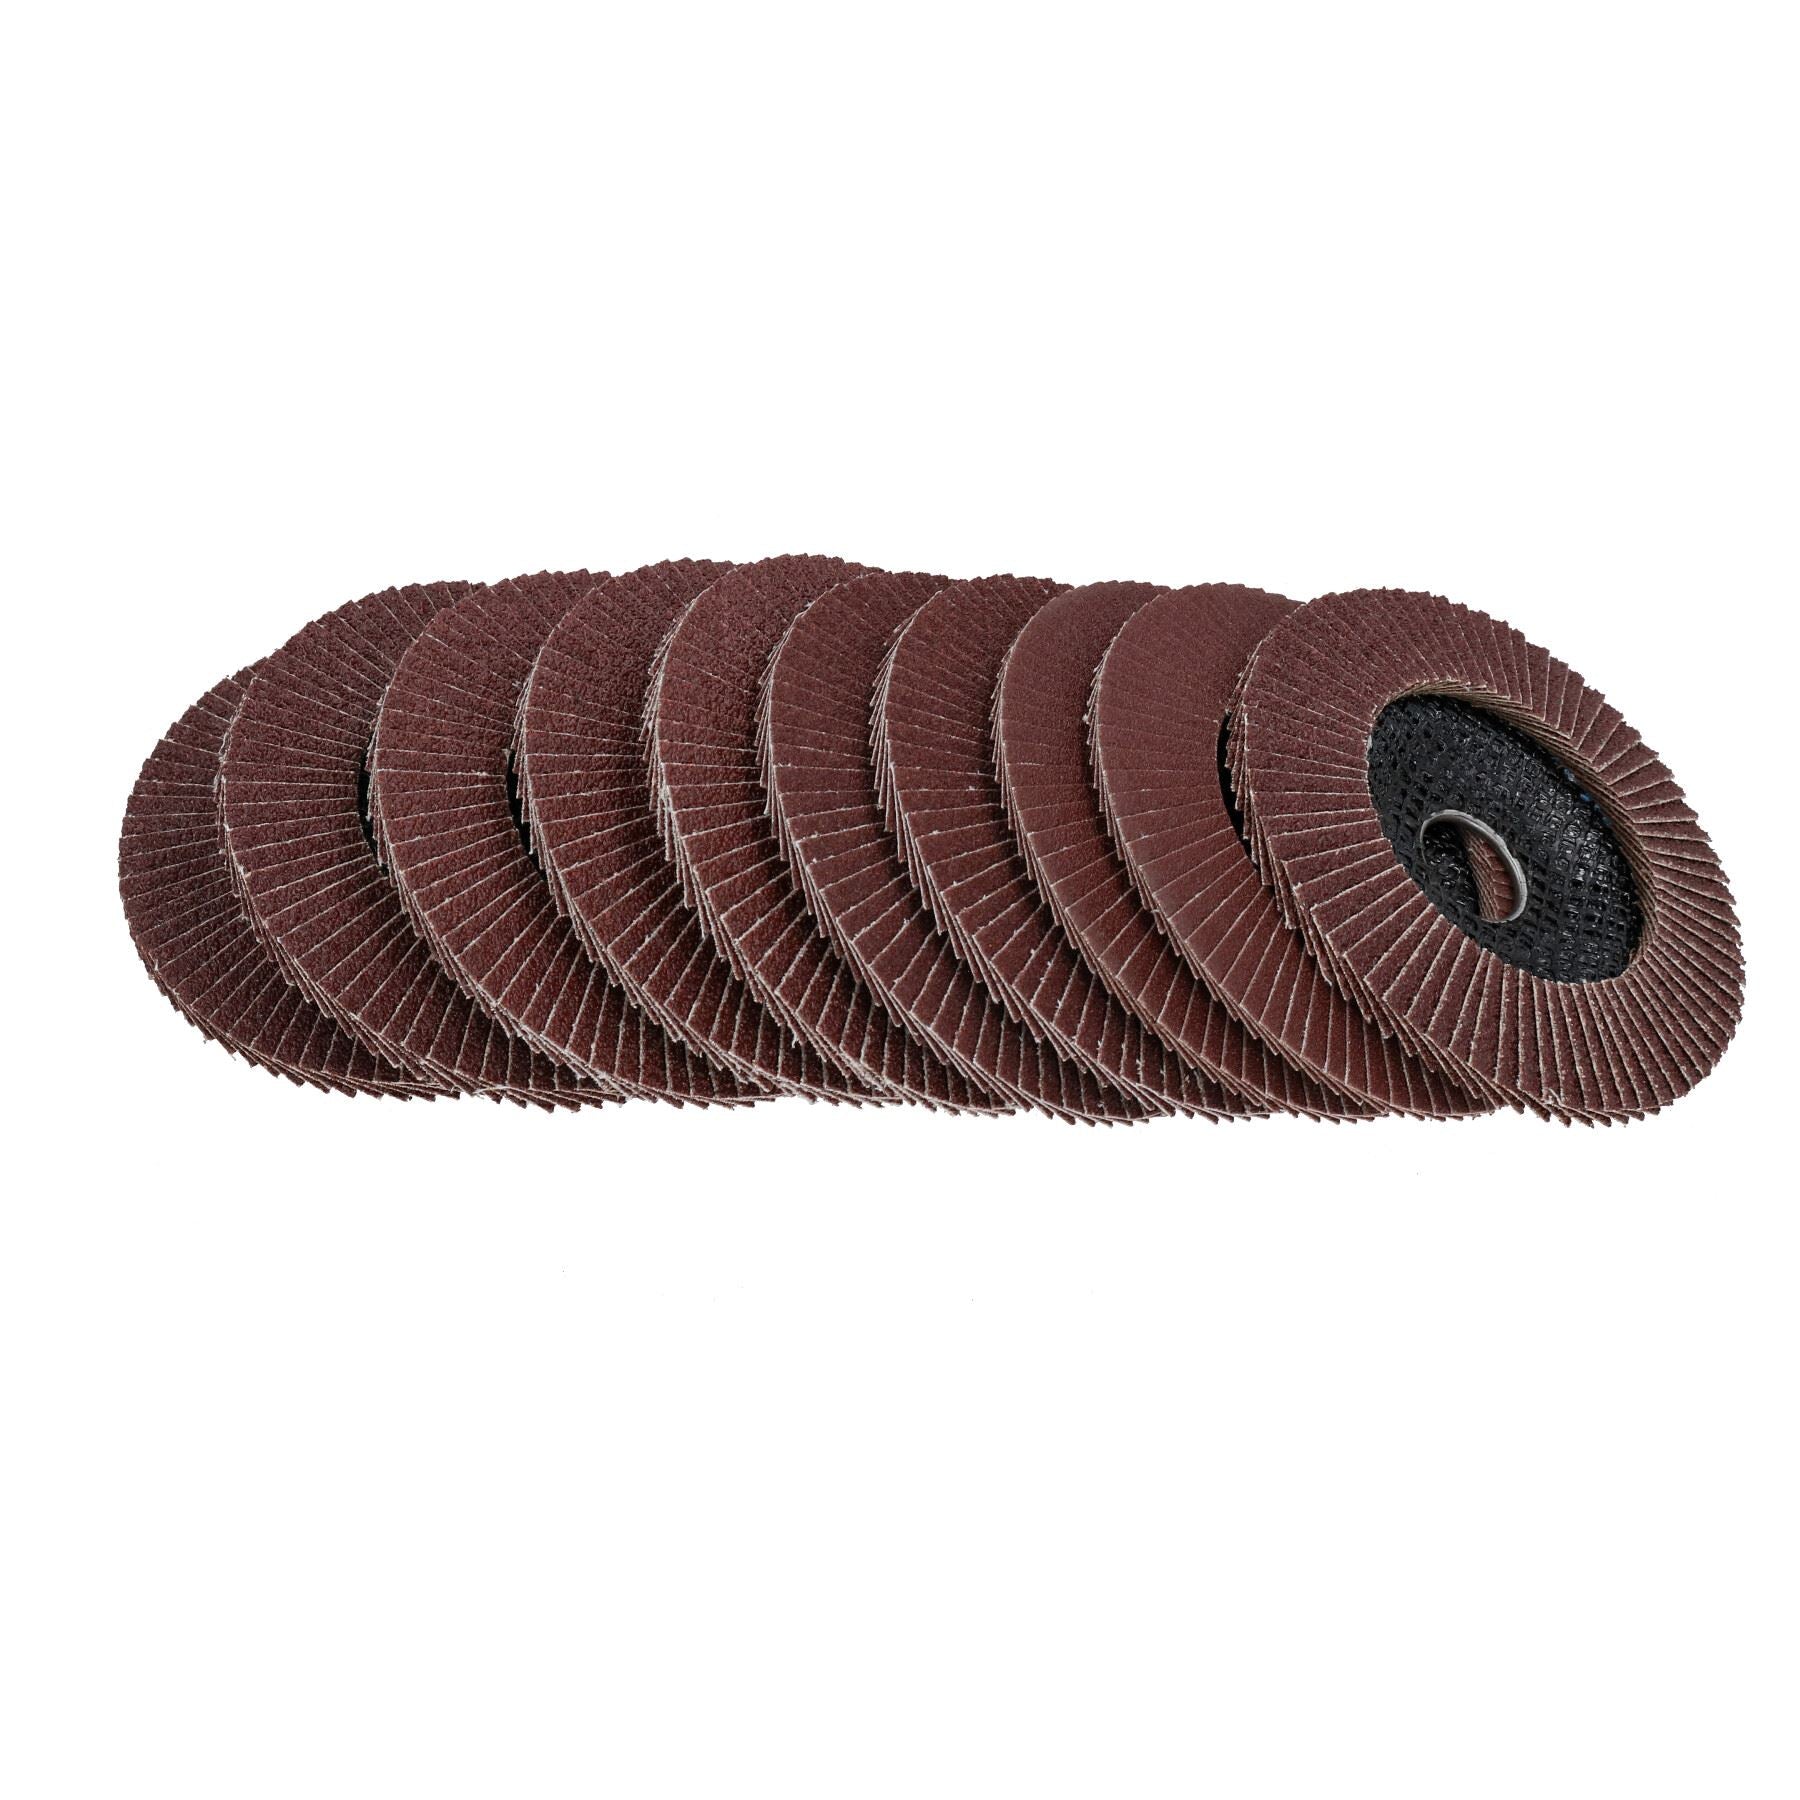 4-1/2” 115mm Mixed Grit Flap Flat Discs For Angle Grinders Removal Sanding